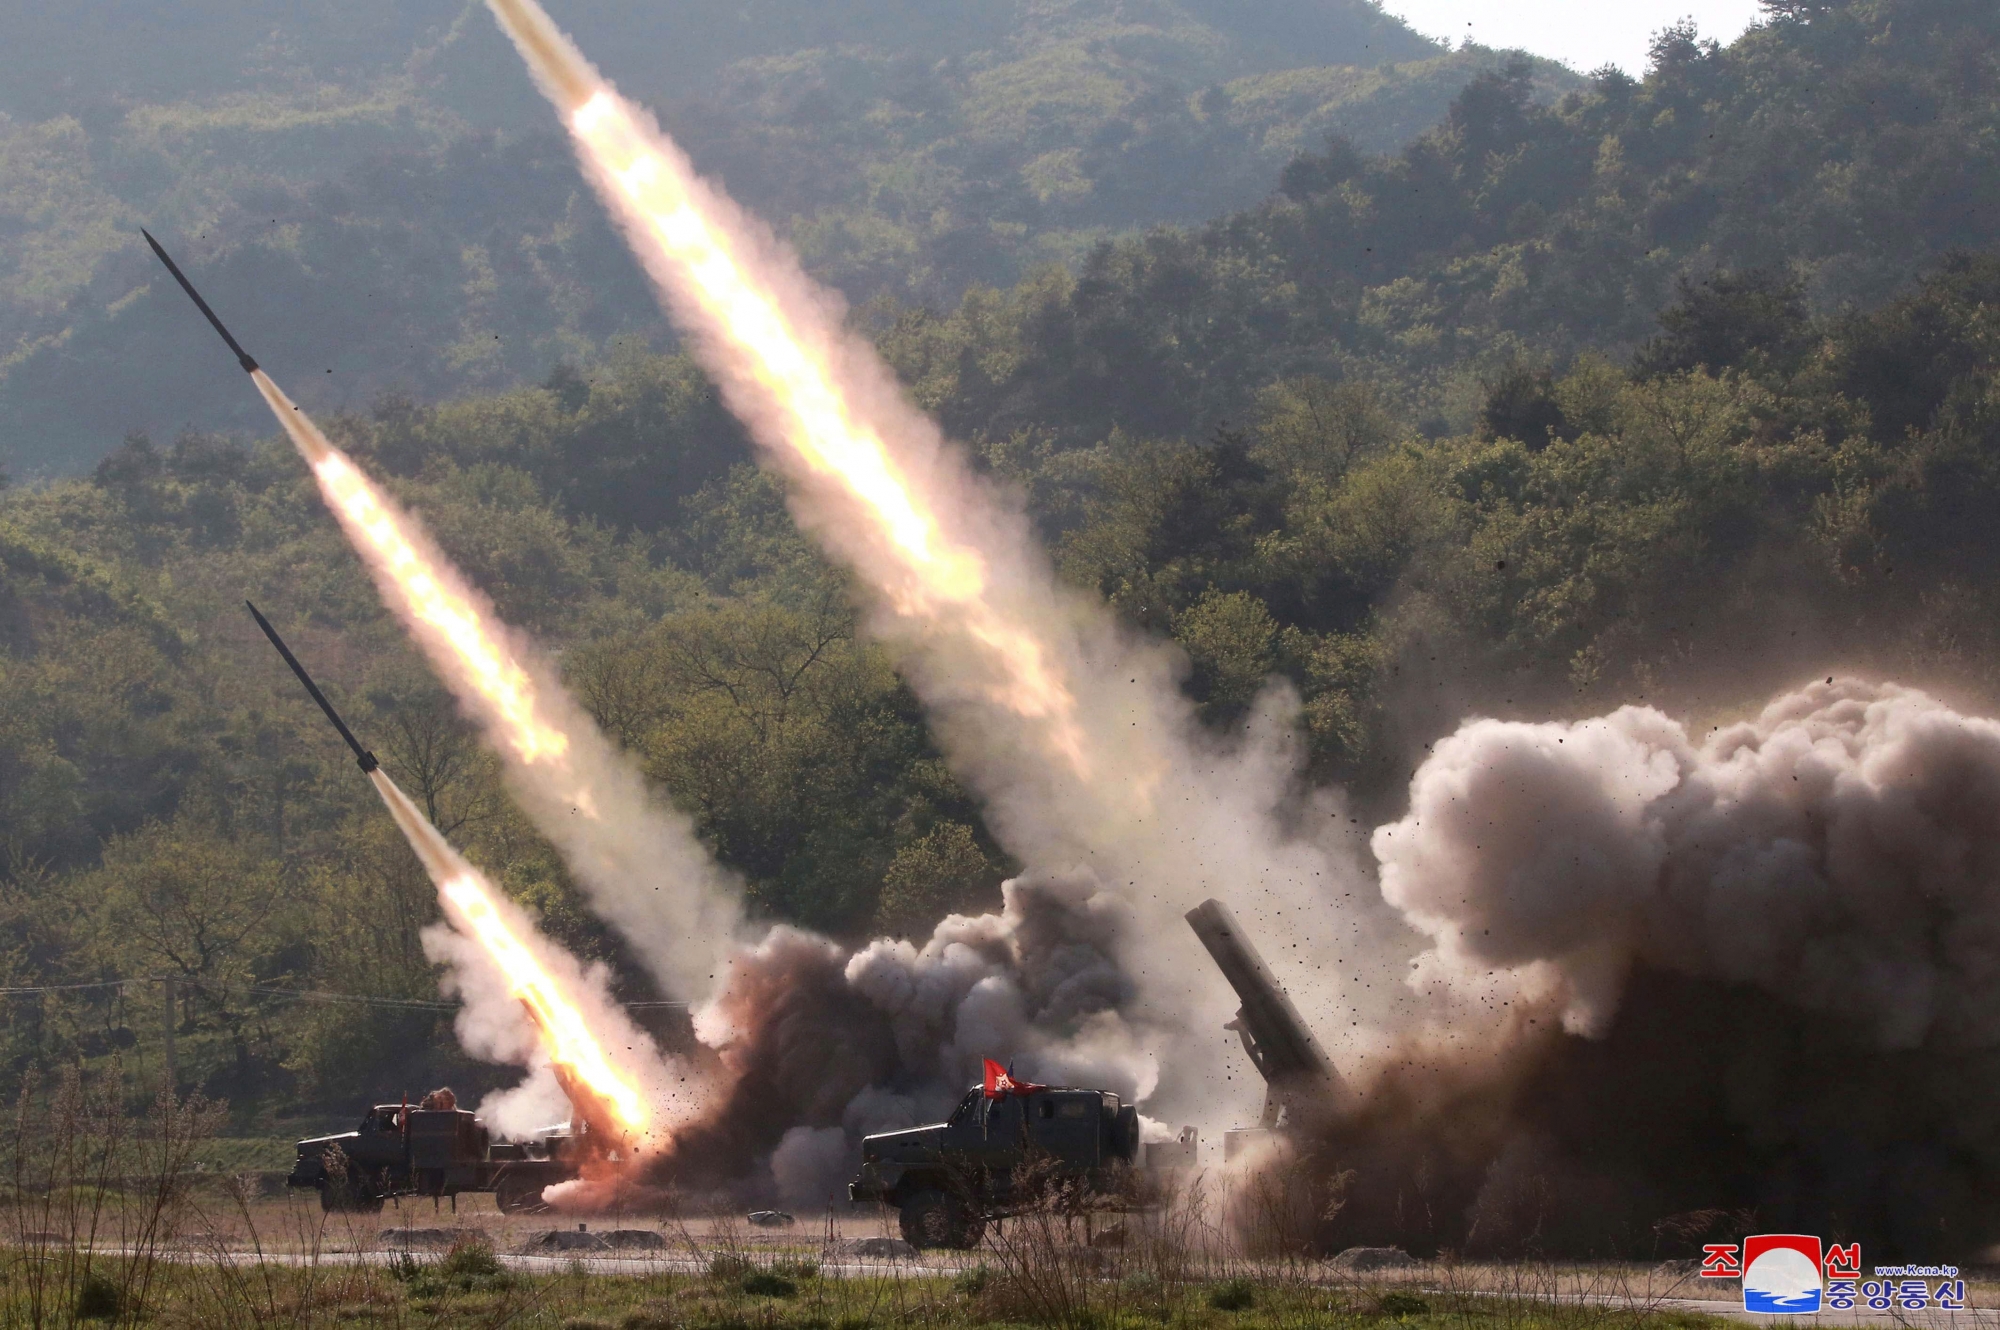 epa07559739 A photo released by the official North Korean Central News Agency (KCNA) shows missles being fired during a strike drill of military units at an undisclosed location in North Korea, 09 May 2019 (issued 10 May 2019).  EPA/KCNA   EDITORIAL USE ONLY NORTH KOREA DEFENSE DRILLS